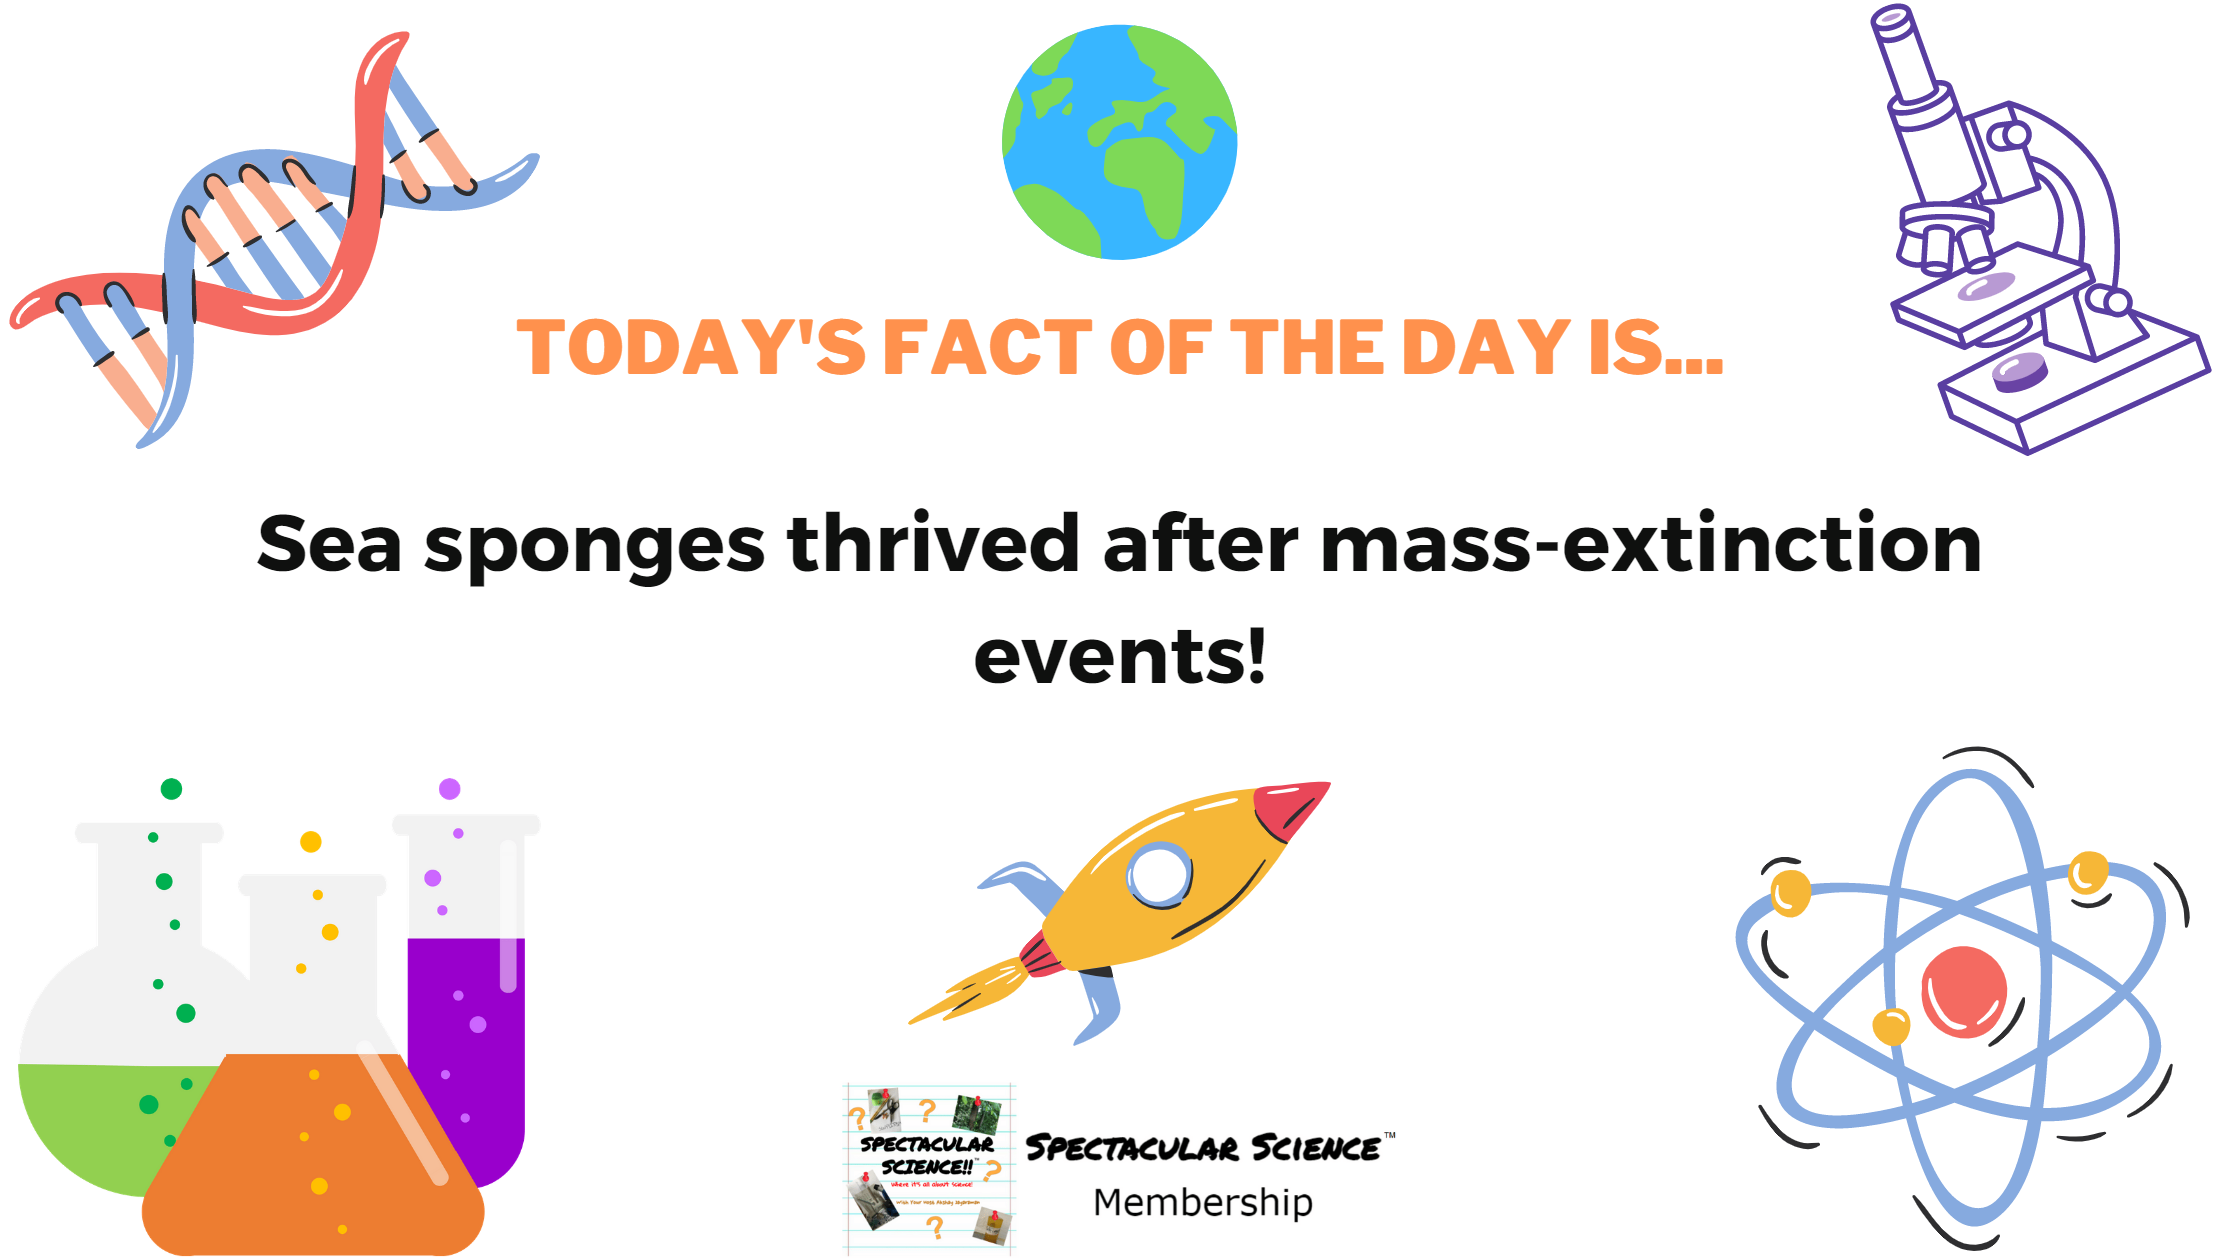 Fact of the Day Image February 28th